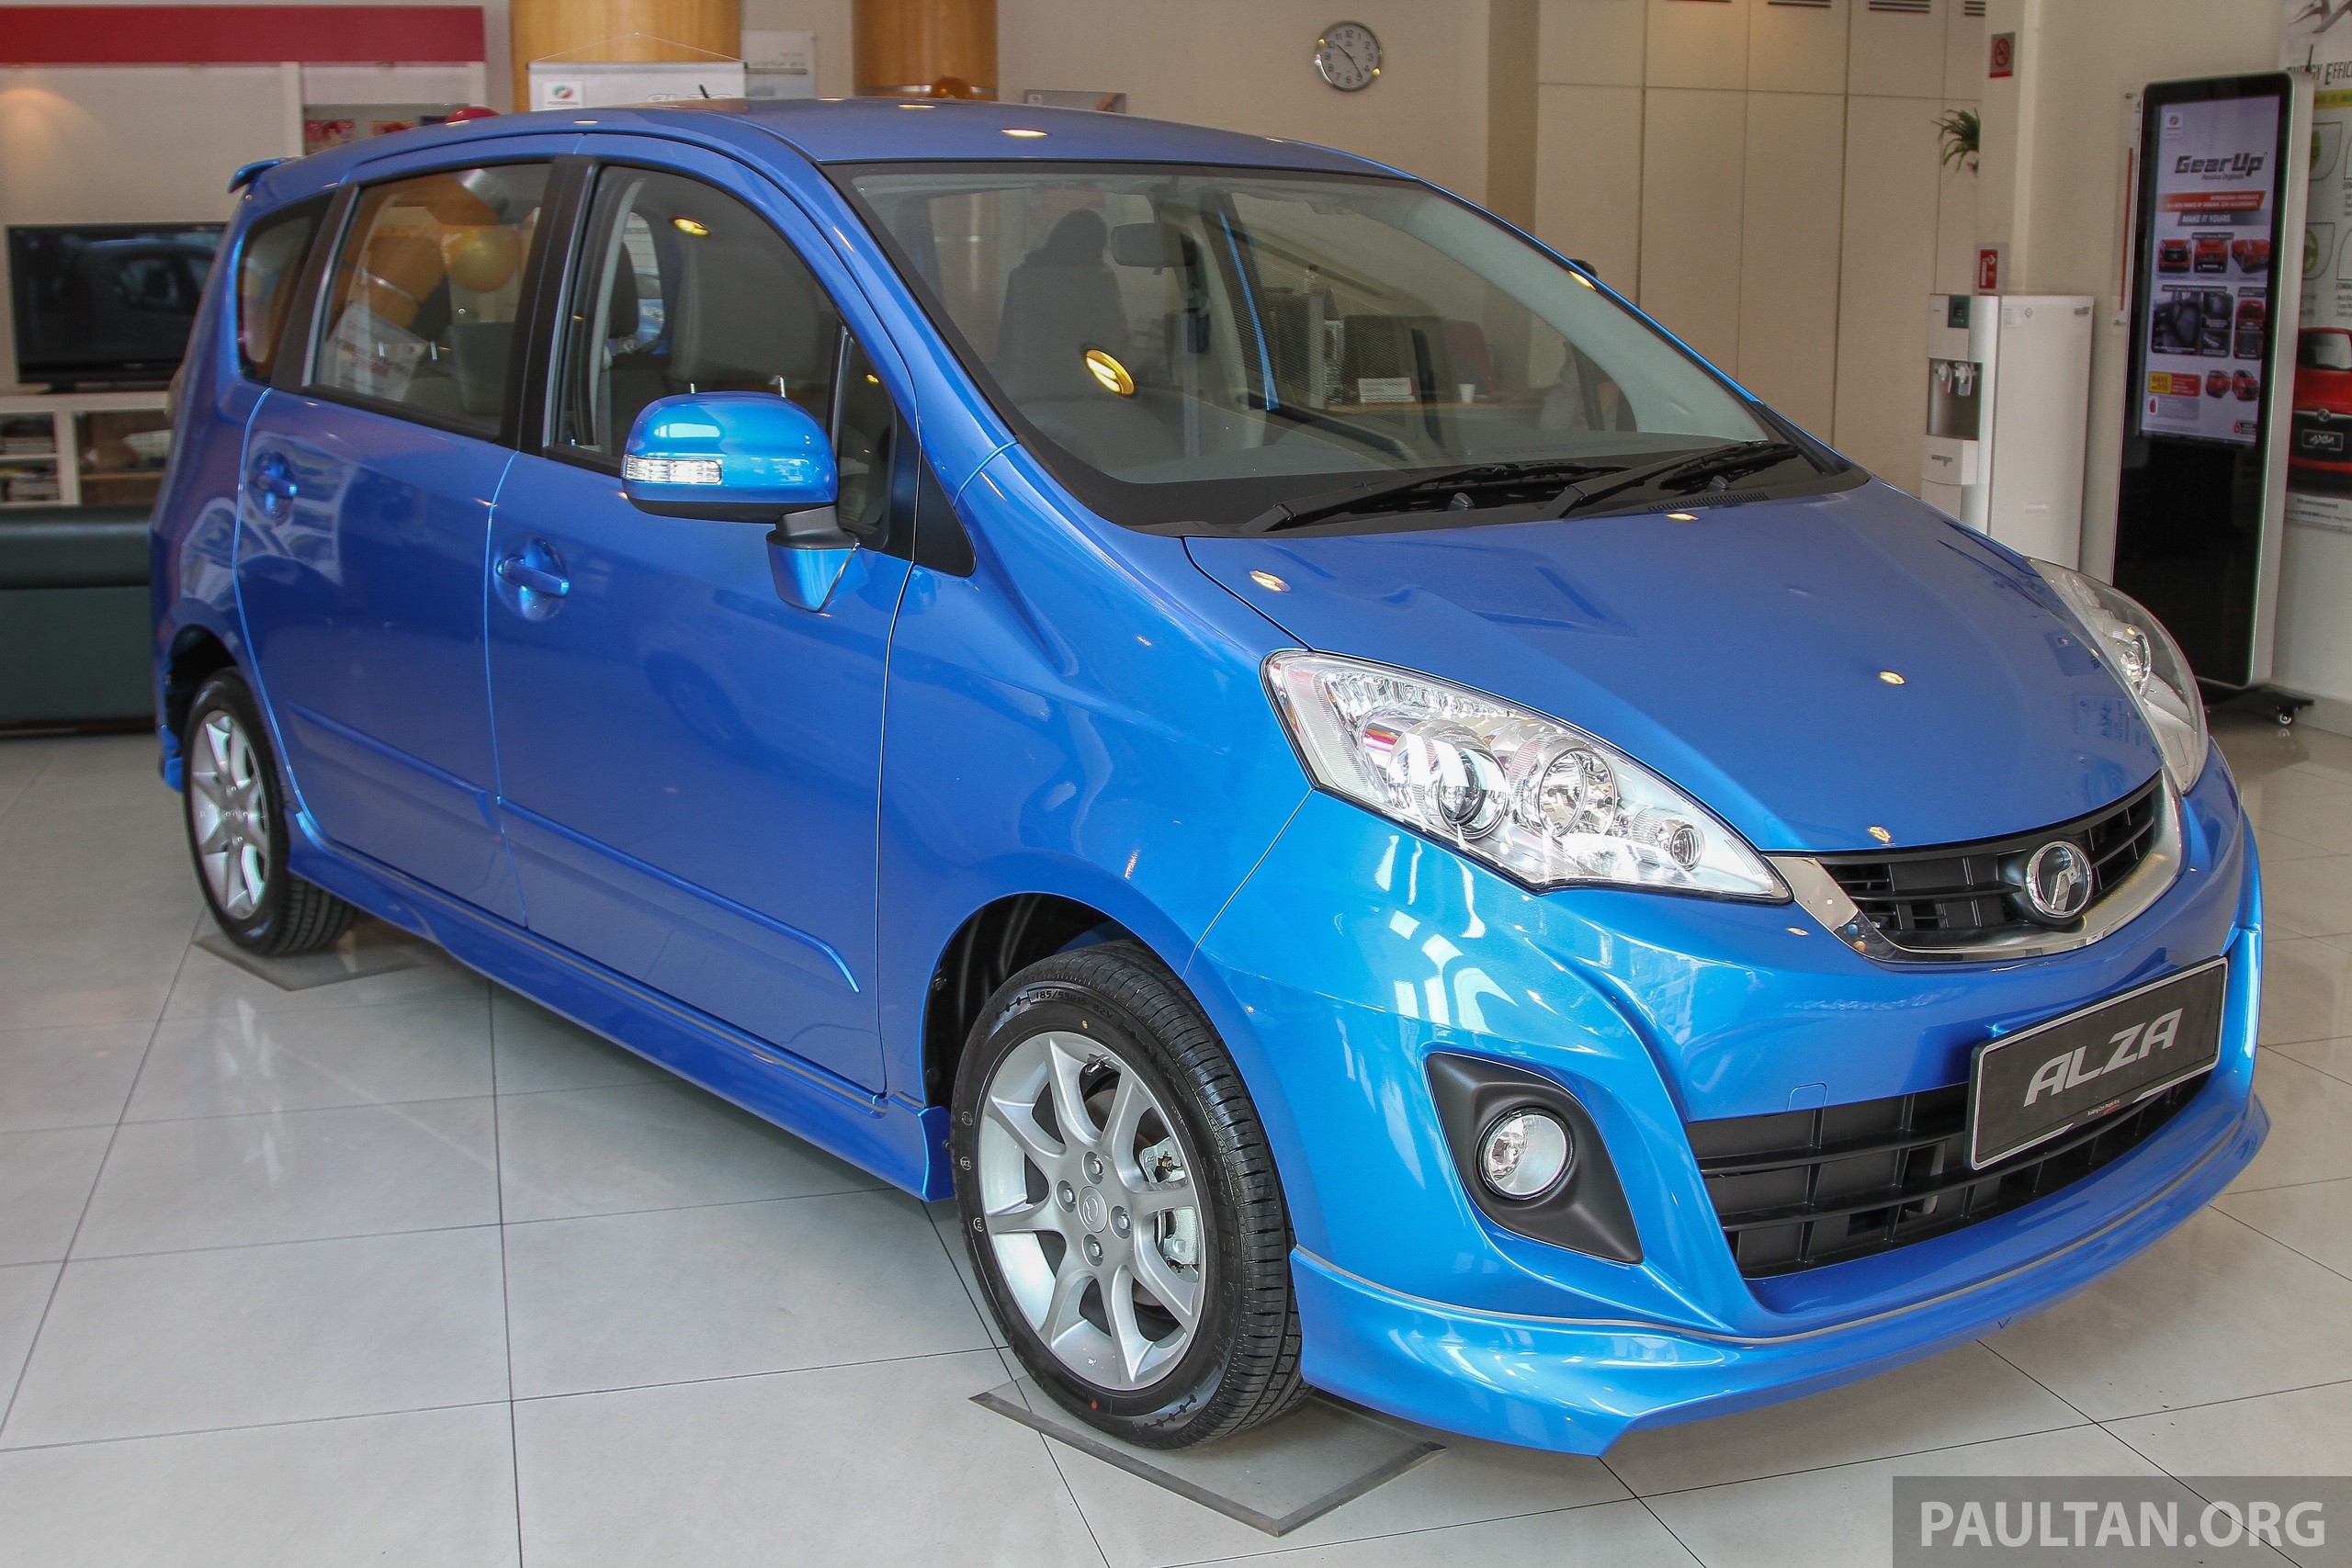 Perodua Alza to get updates before being replaced